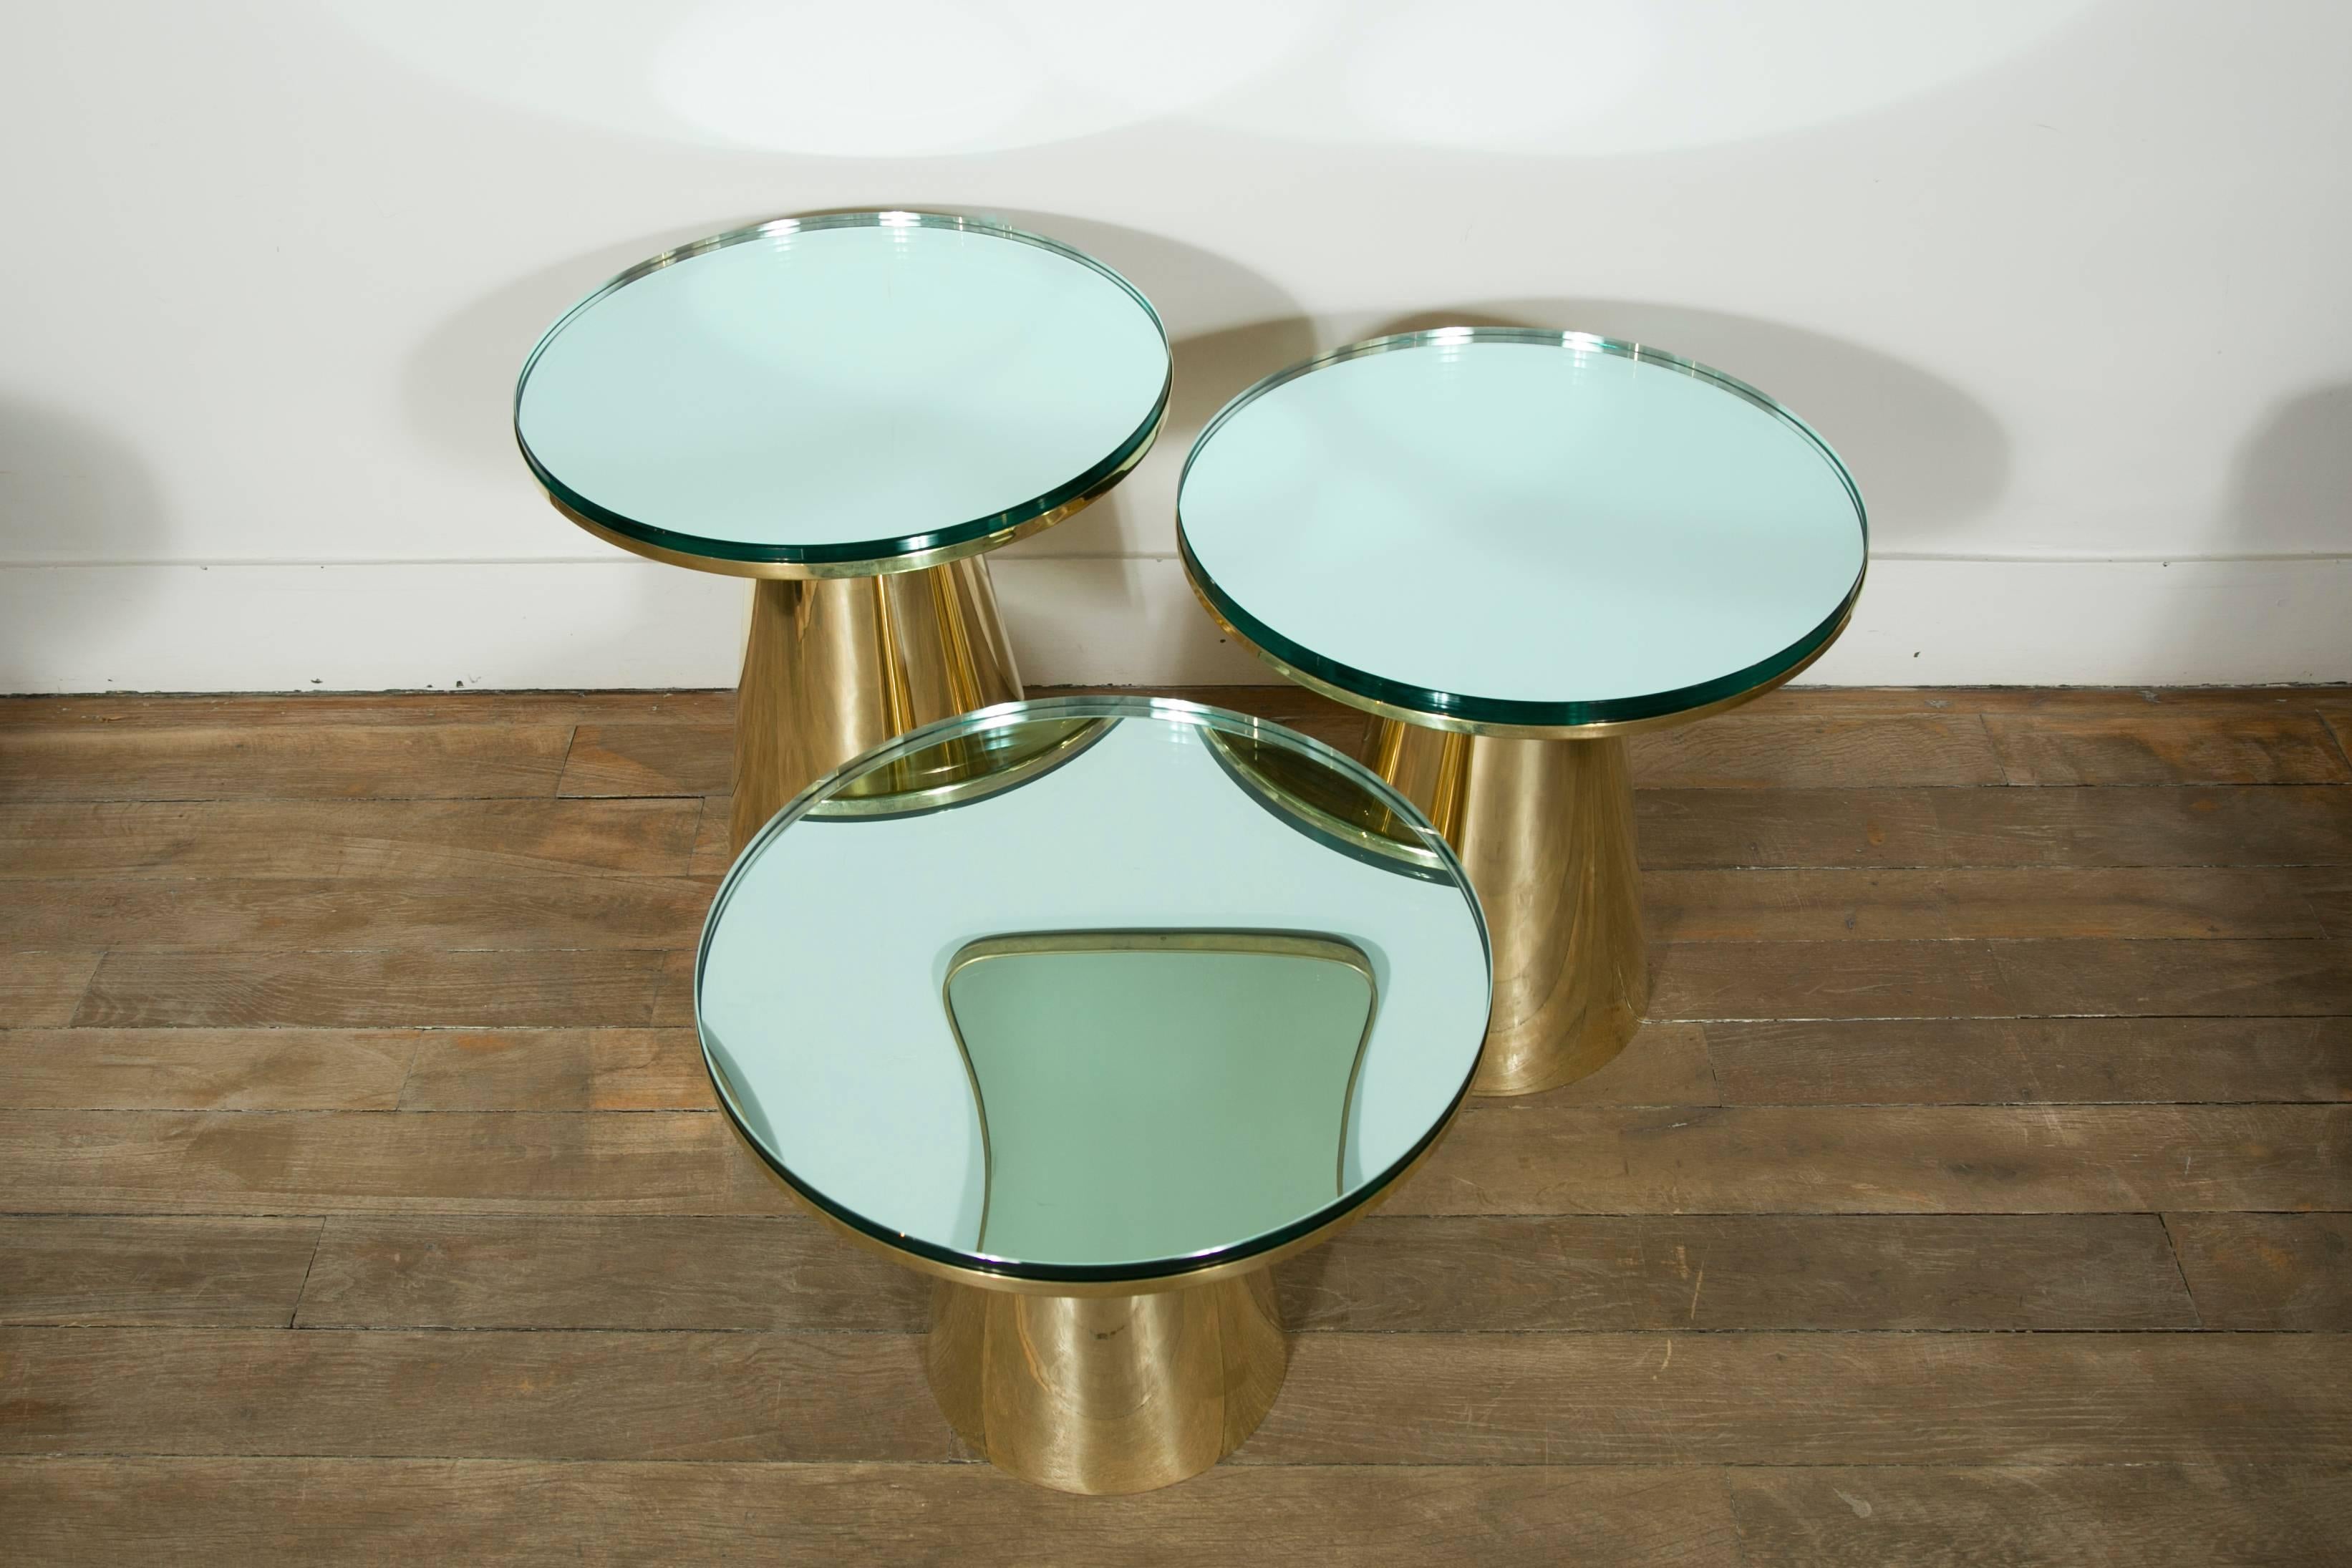 A set of three guéridons.
Thick vintage mirror tops on brass bases. 
Italy, 2017


Guéridon 1: 
Height 48 cm / 18.89 in.
Diameter 45 cm / 17.71 in.

Guéridon 2: 
Height 43.5 cm / 17.72 in.
Diameter 45 cm / 17.71 in.

Guéridon 3 
Height